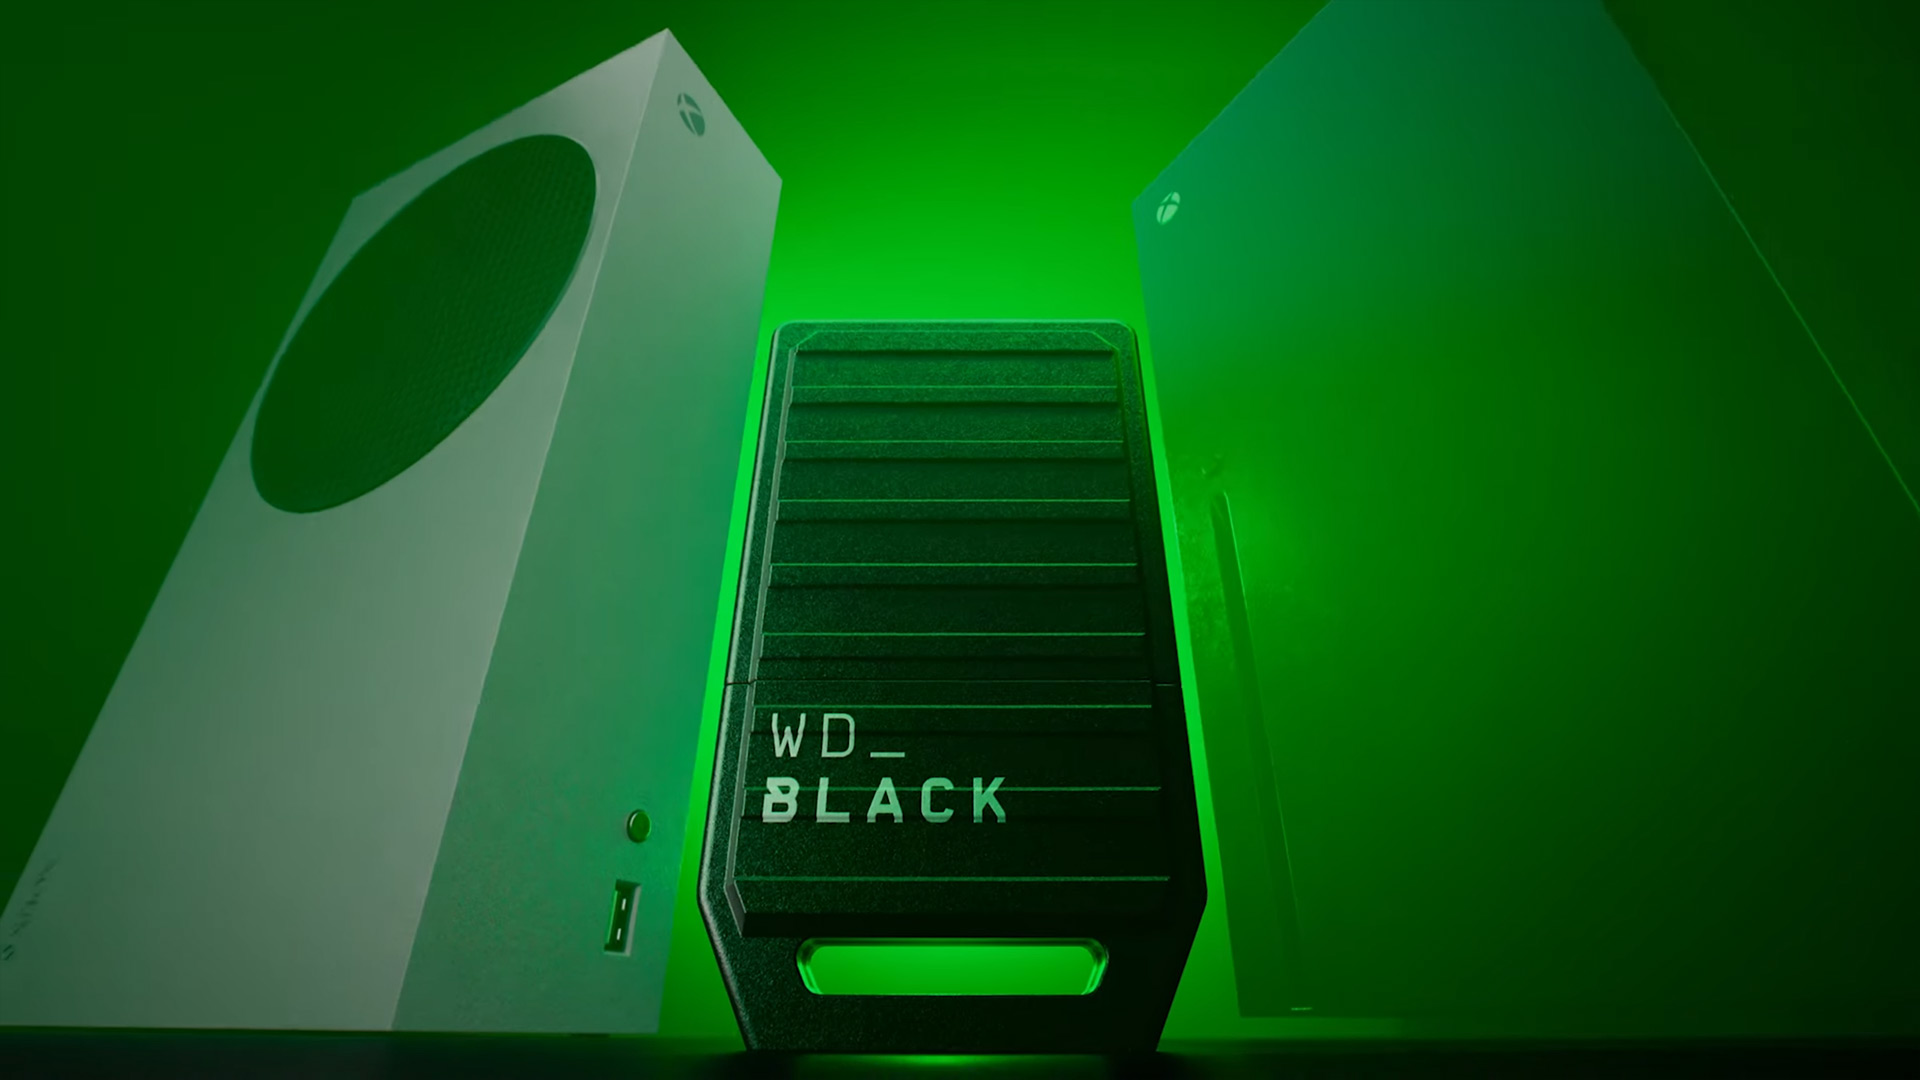 The WD_BLACK C50 expansion card is now available for the Xbox Series X|S